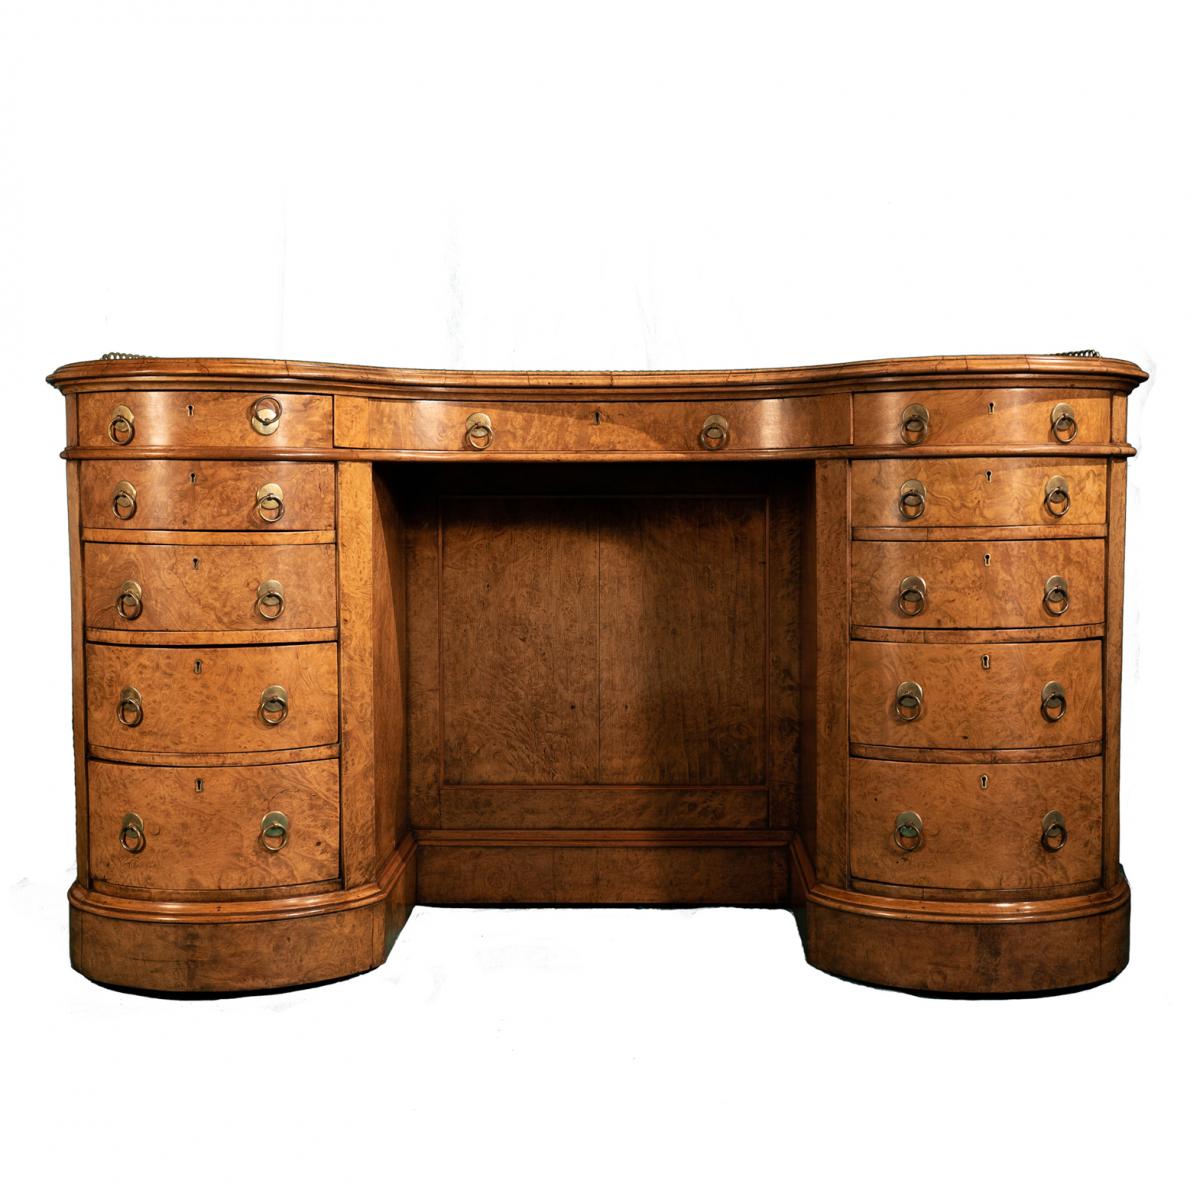 Gillows style kidney shaped desk